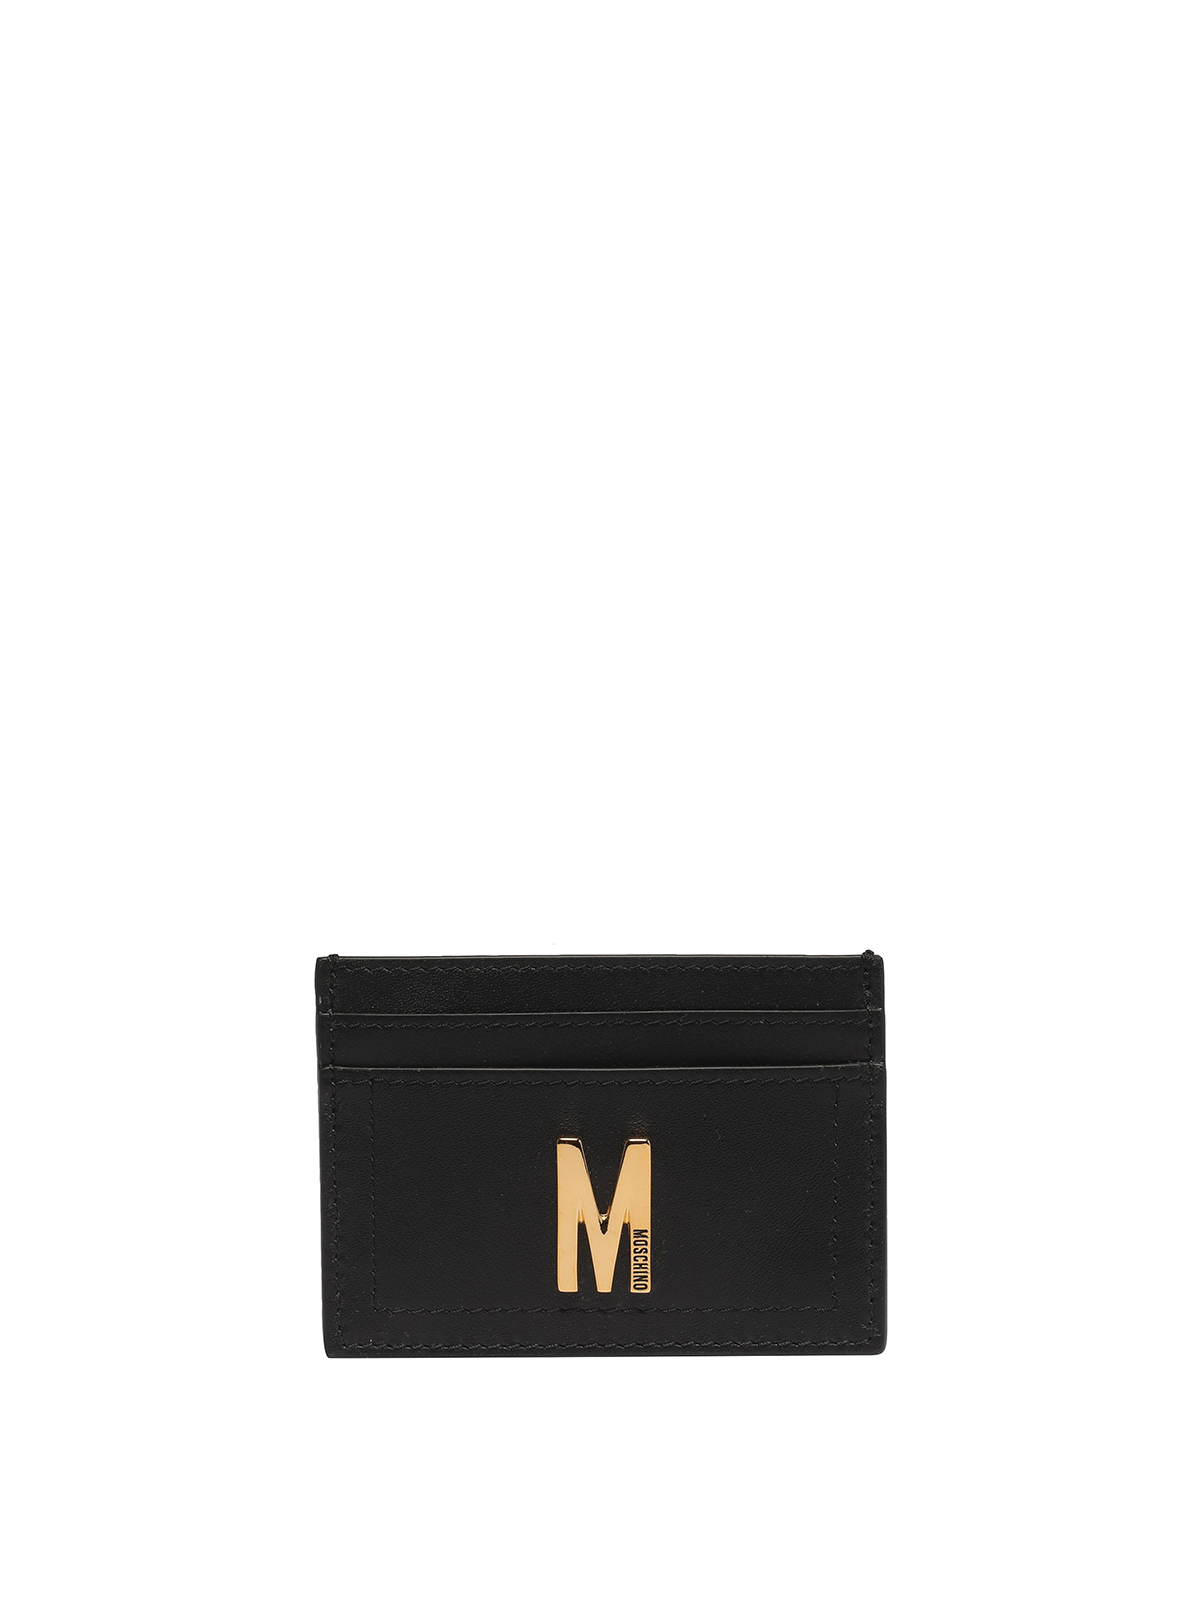 Moschino Leather Wallet In Black